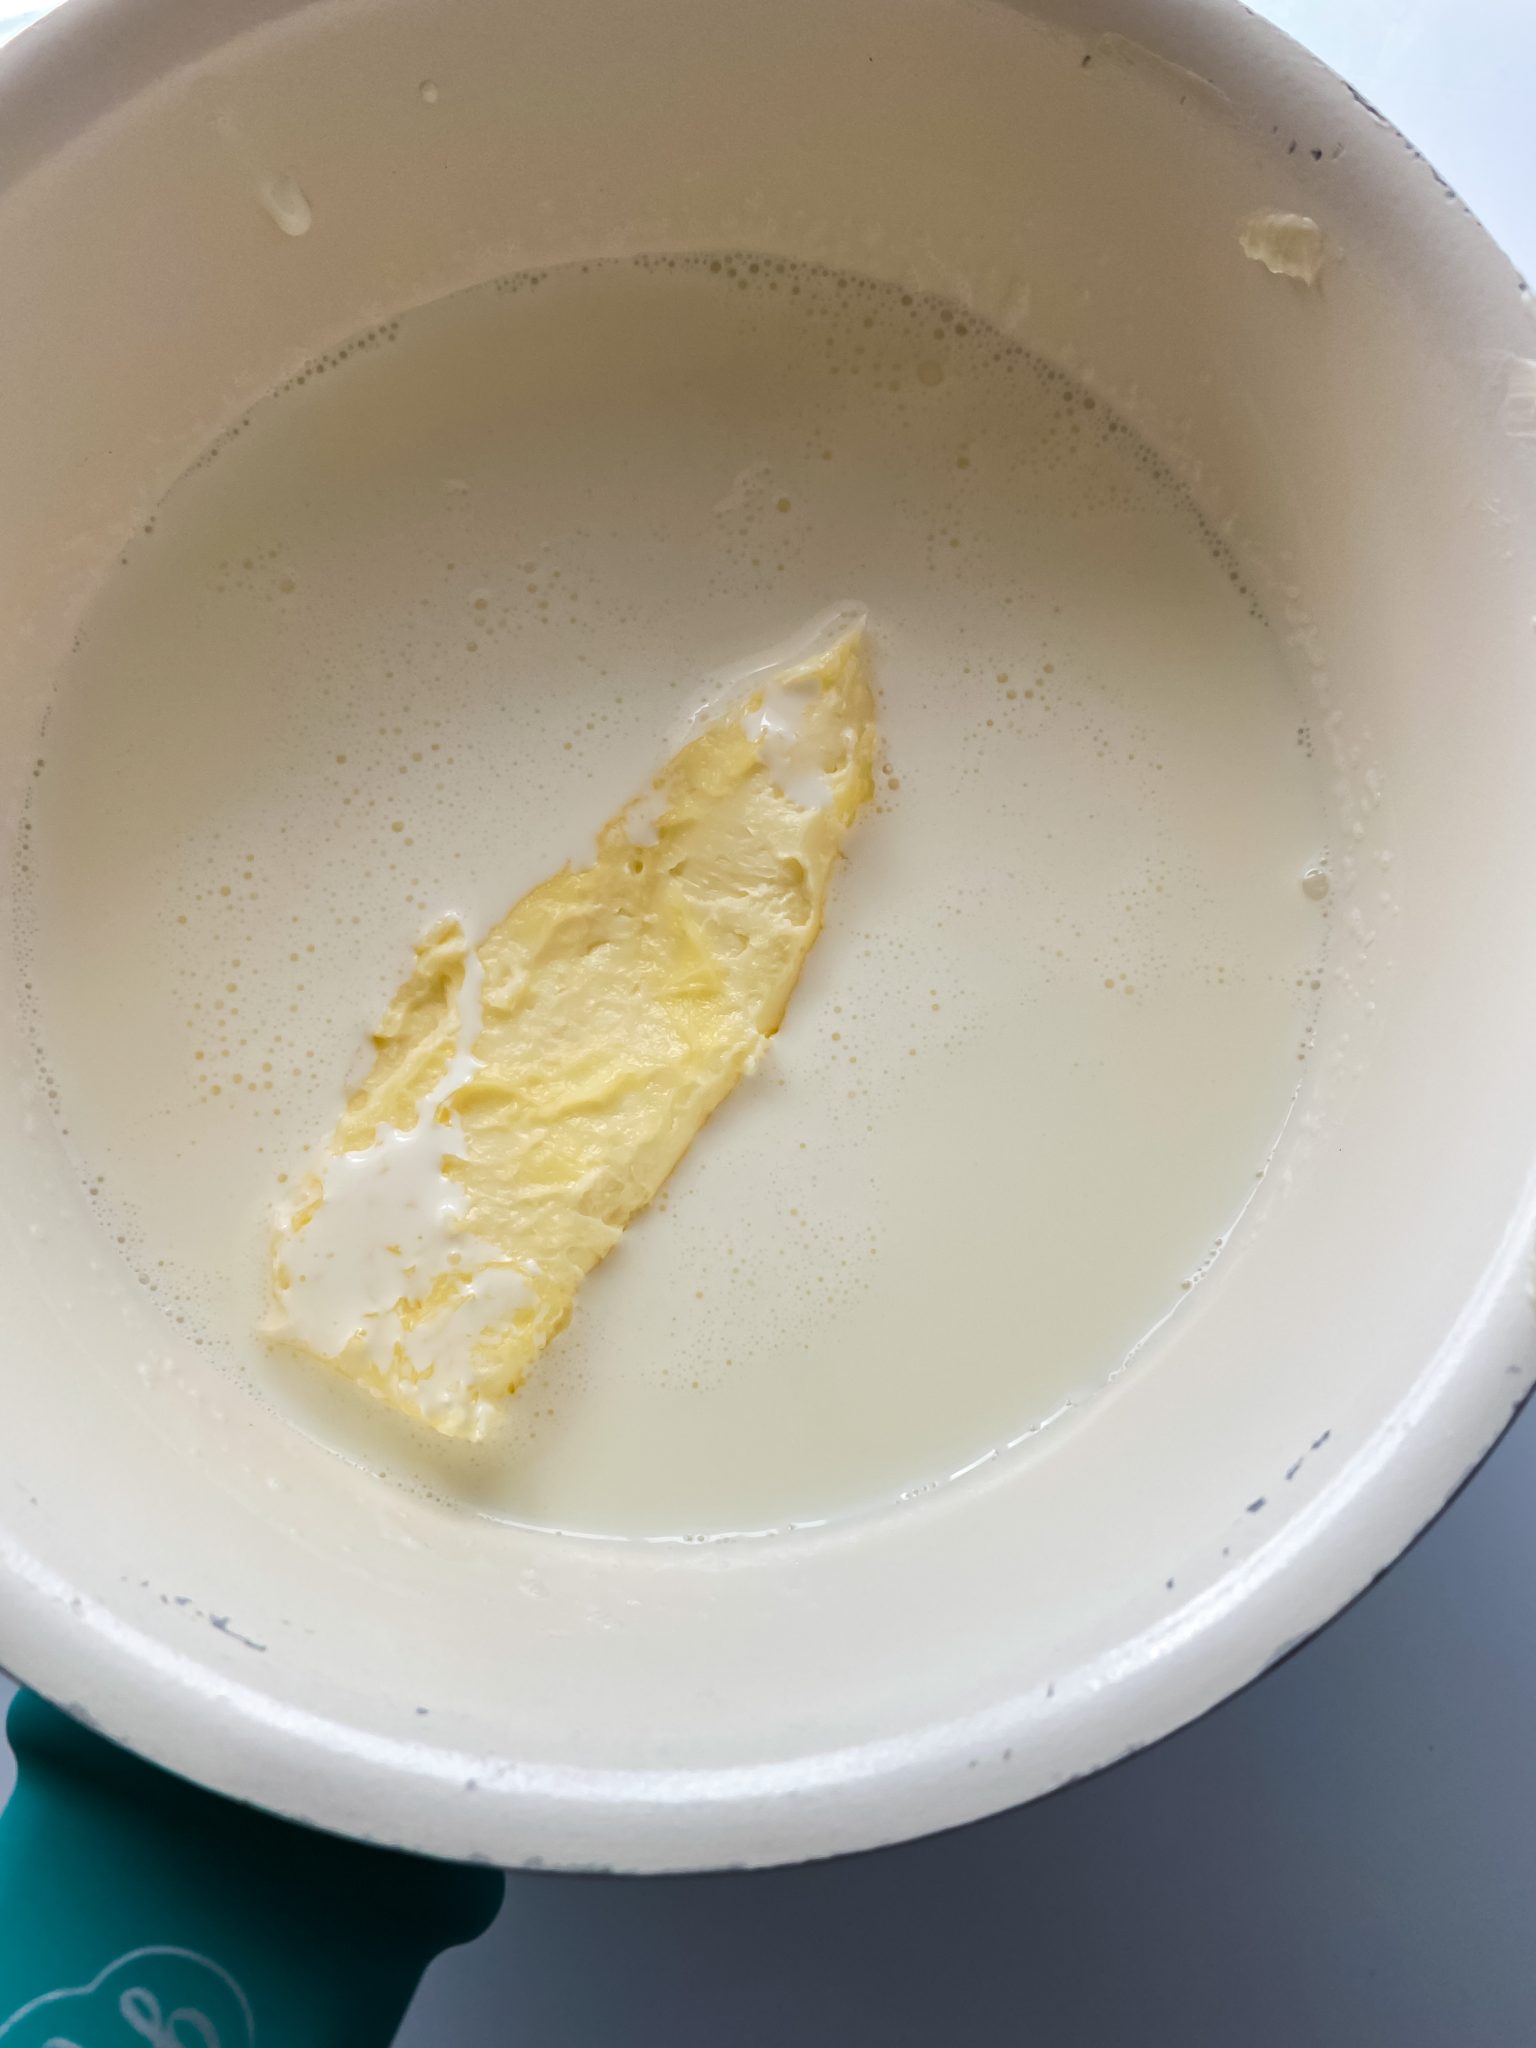 Step-by-step instructions to make mashed potatoes in a crockpot